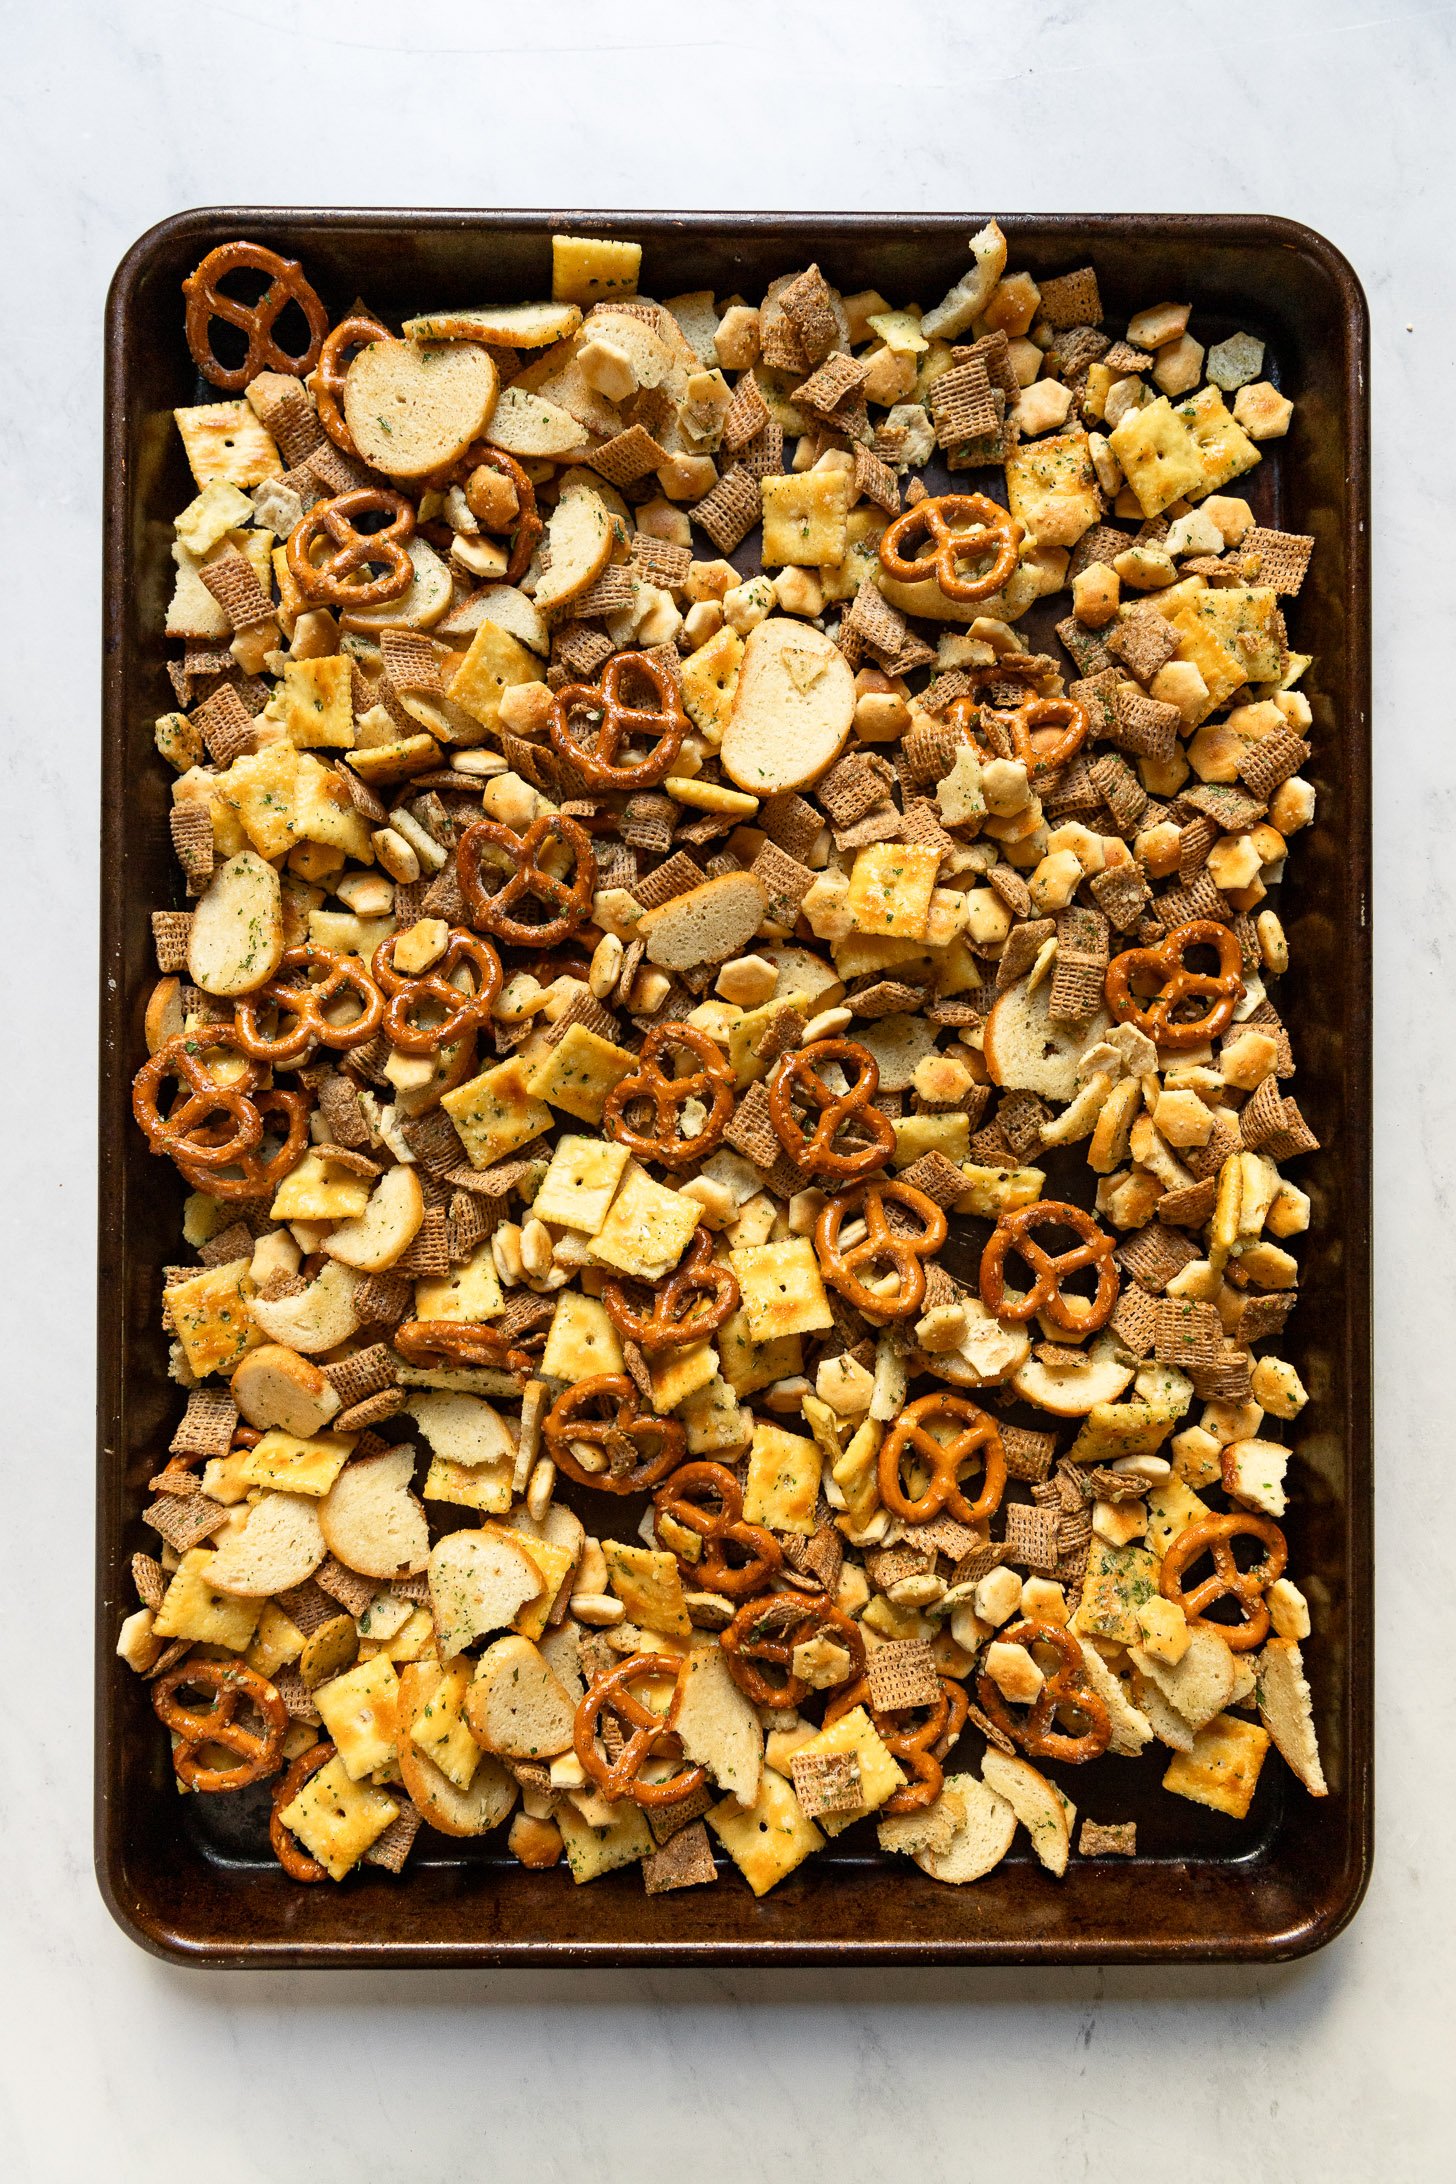 Sheet pan with tossed and baked ranch snack mix.